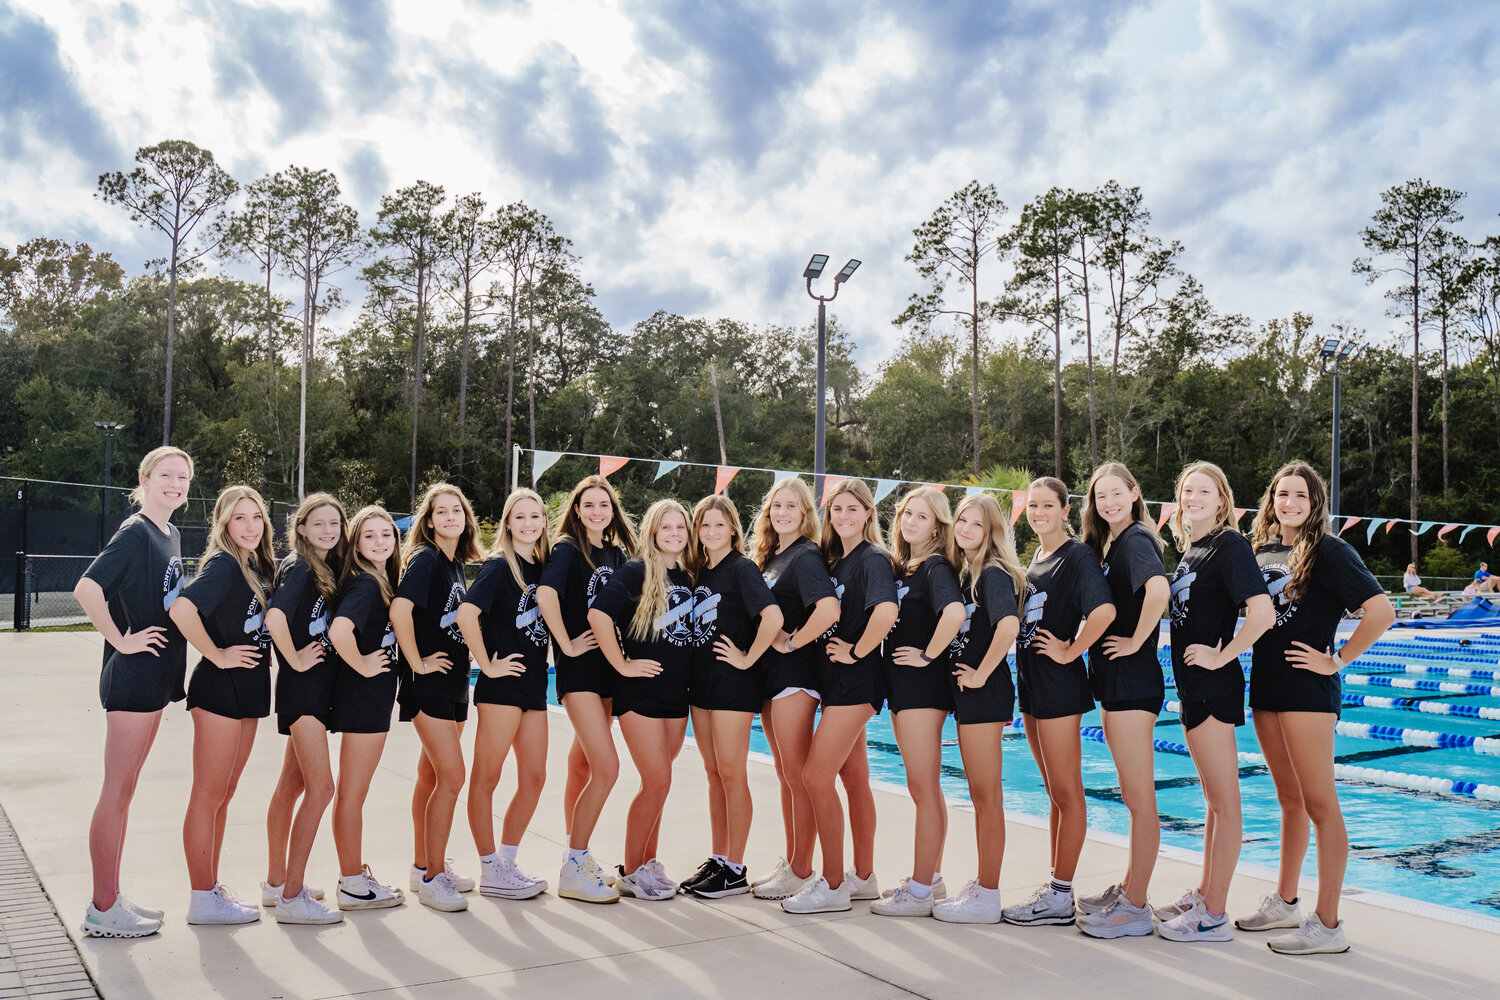 The Ponte Vedra High girls swim team won their third straight regional championship and now move onto states this weekend.